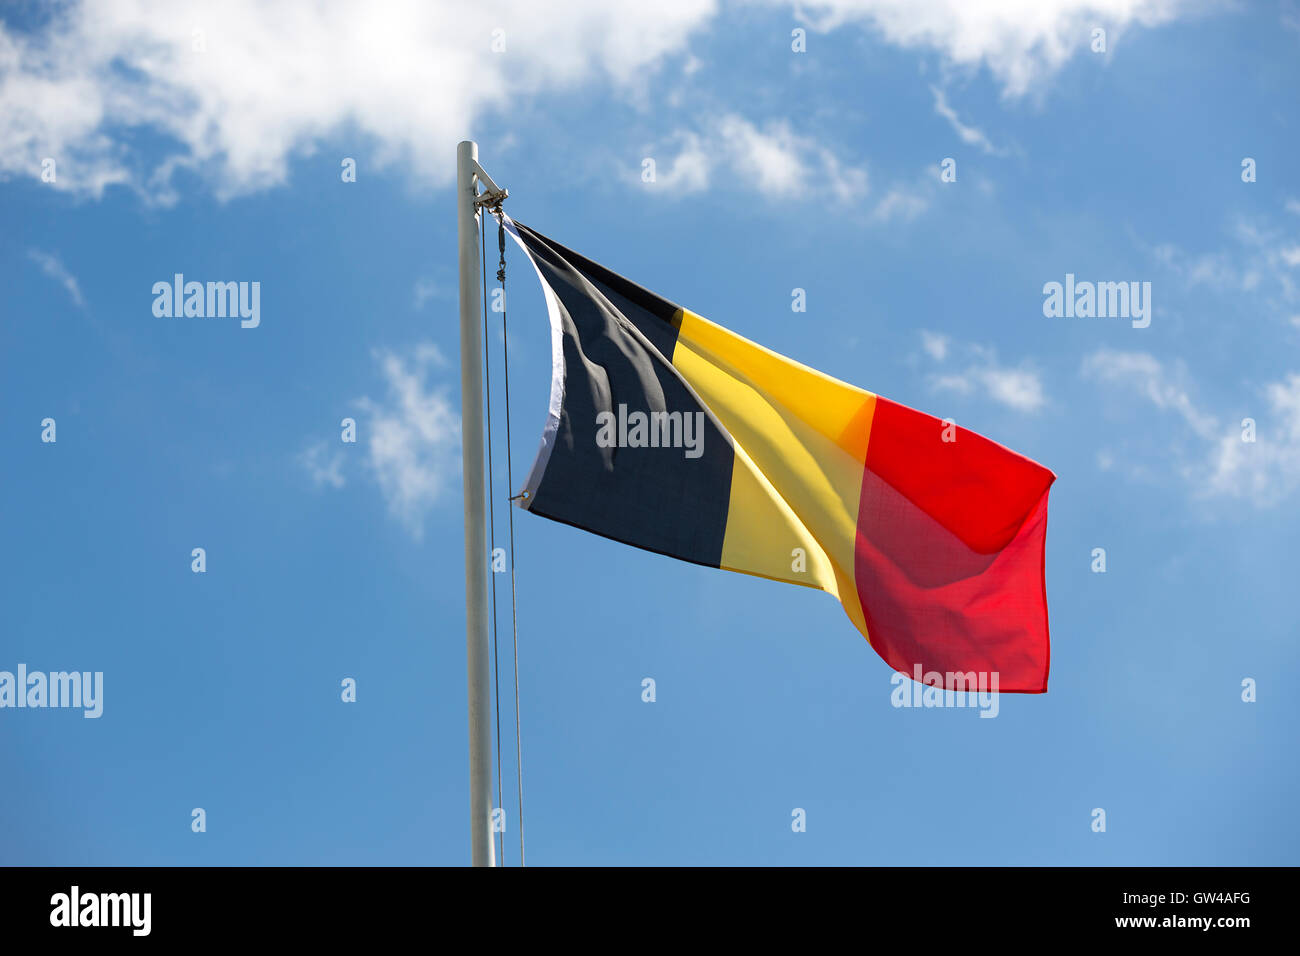 National flag of Belgium on a flagpole in front of blue sky Stock Photo